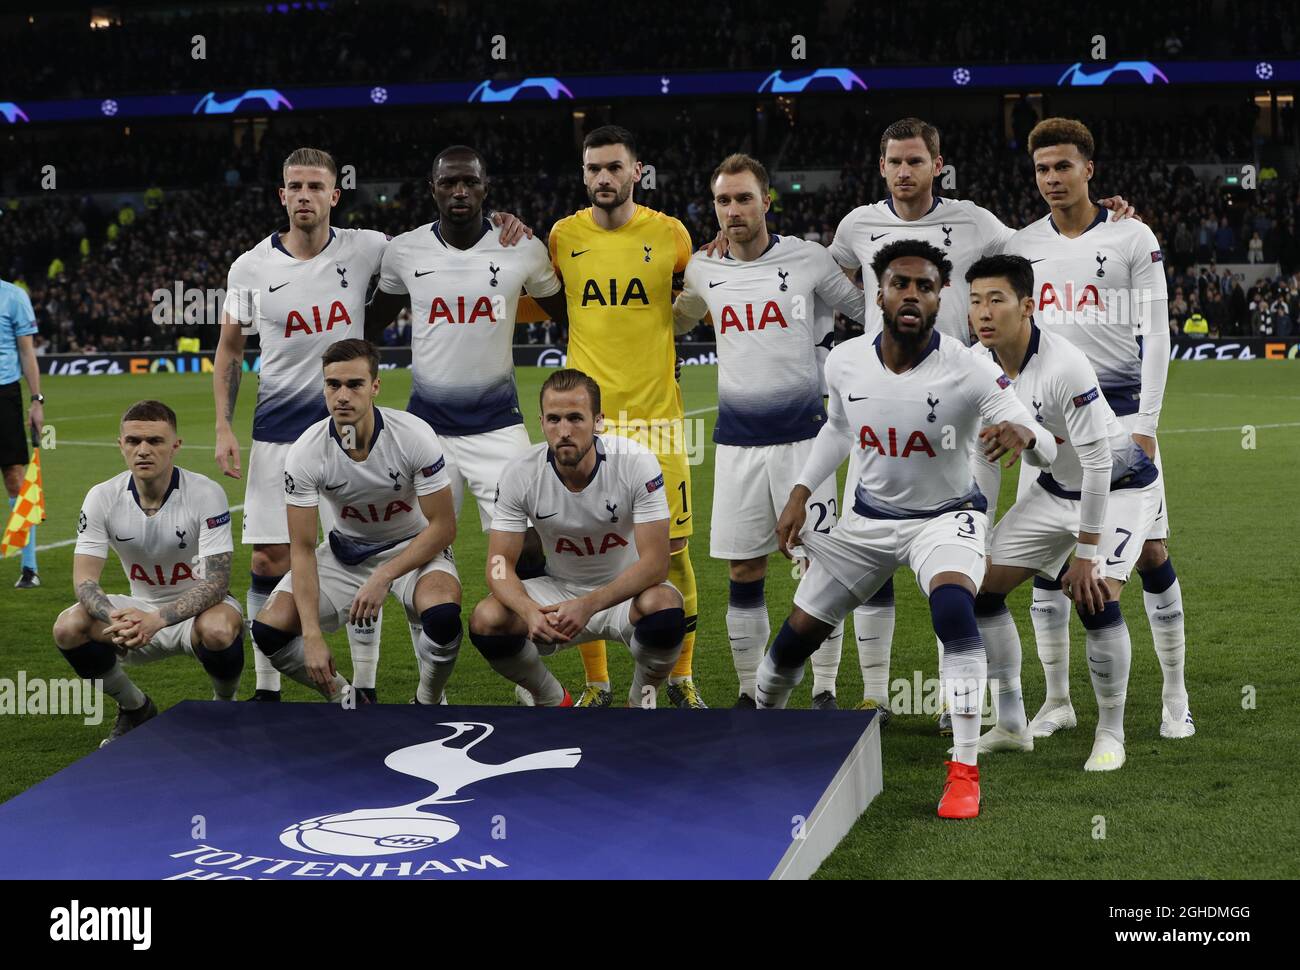 Danny Rose of Tottenham does a sharp retreat after lining up for a team pictures during the UEFA Champions League match at the Tottenham Hotspur Stadium, London. Picture date: 9th April 2019. Picture credit should read: Darren Staples/Sportimage via PA Images Stock Photo